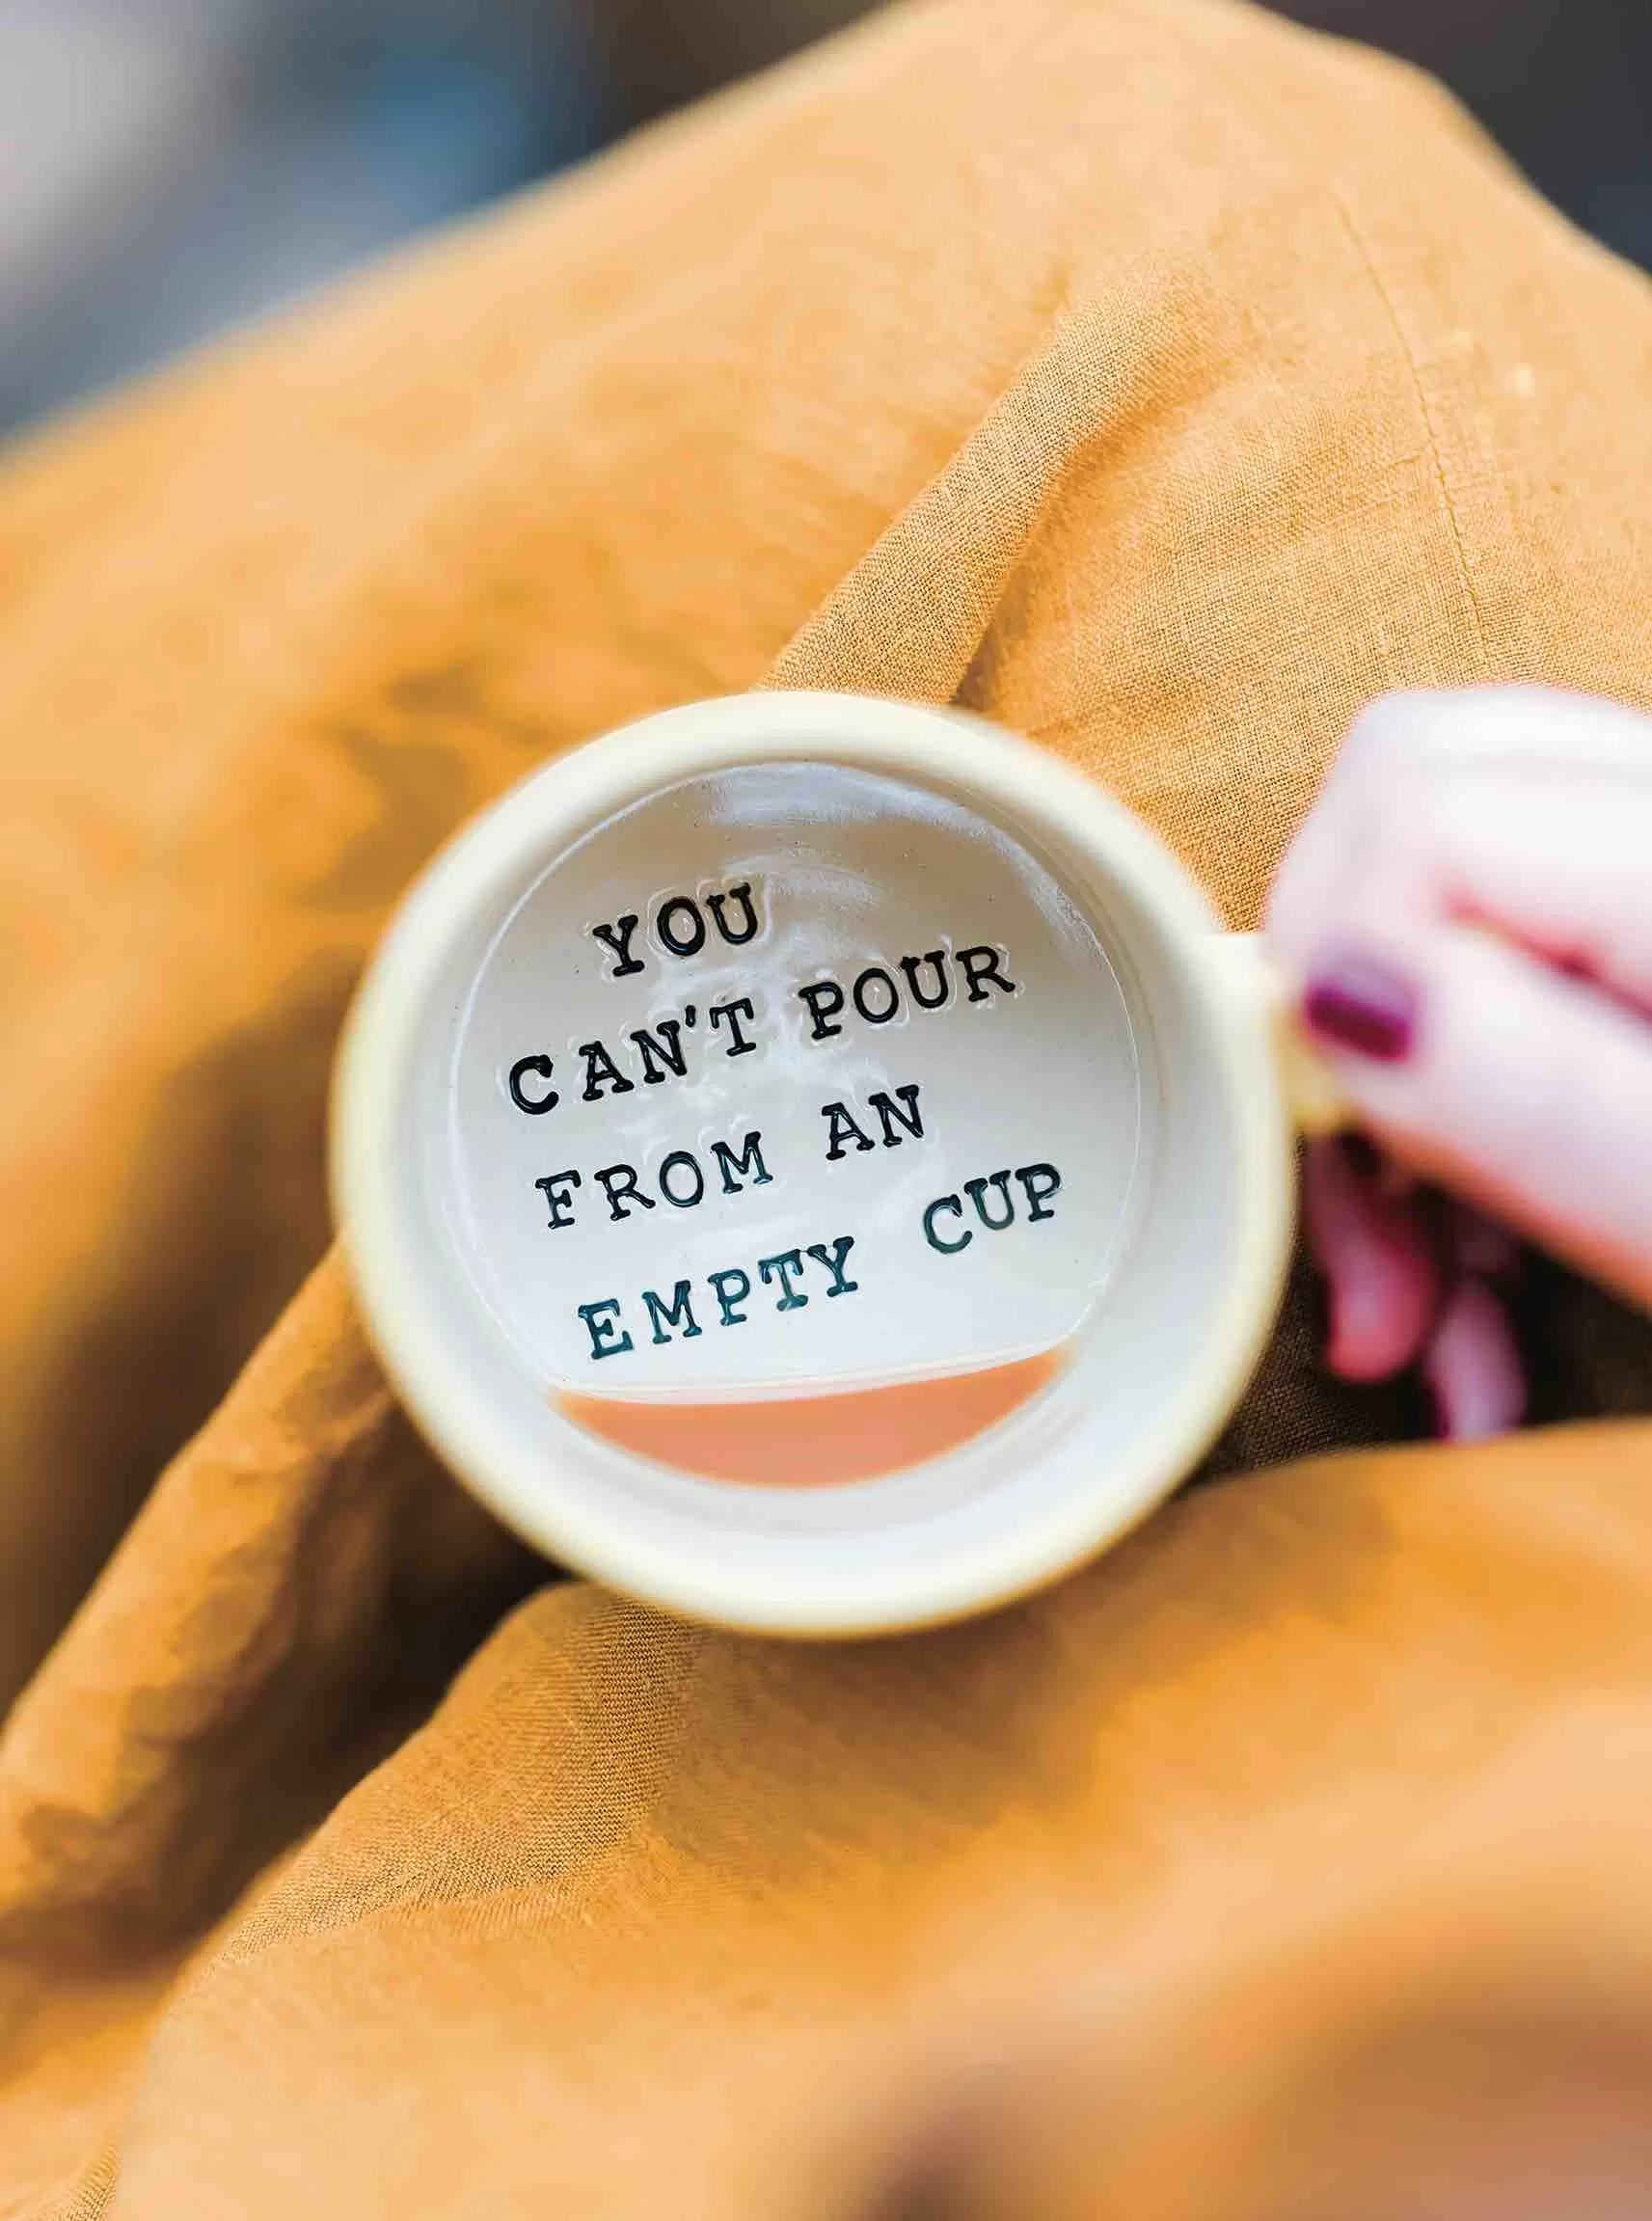 Zara ceramic mug with the phrase you can't pour from an empty mug stamped inside.